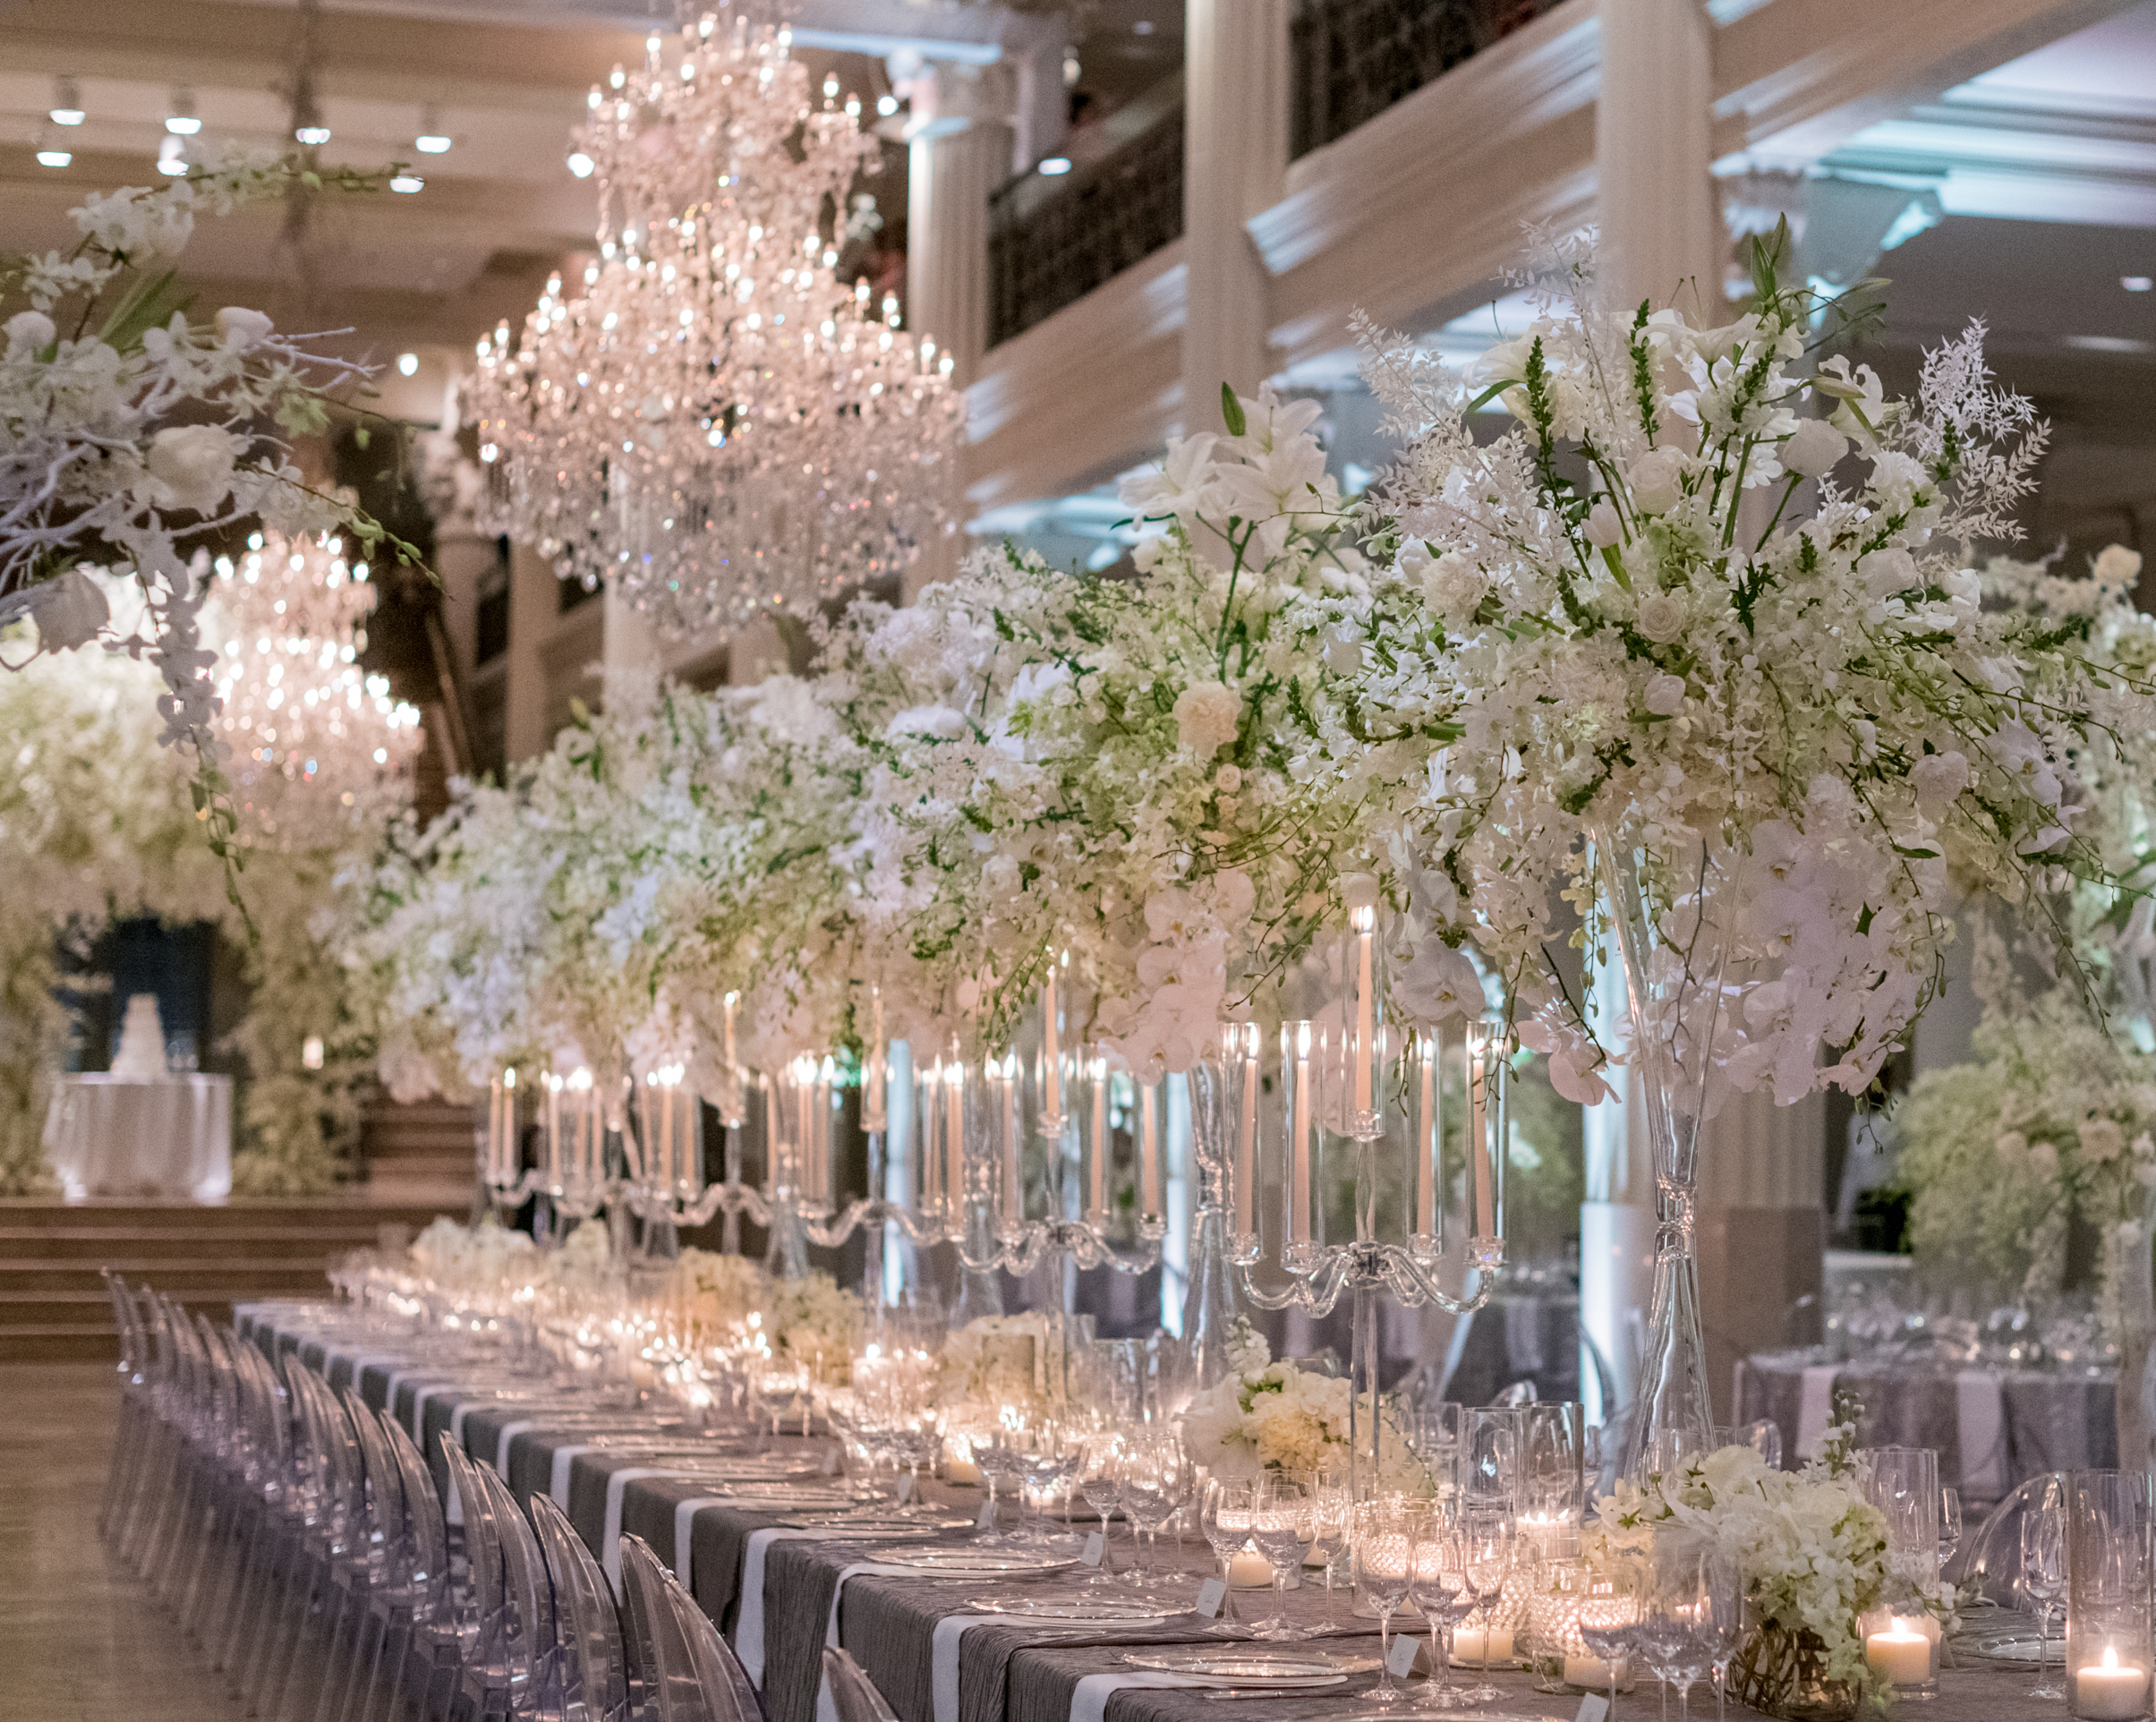 A family style reception dinner is set up with tall white flower centerpieces for a wedding in Houston.